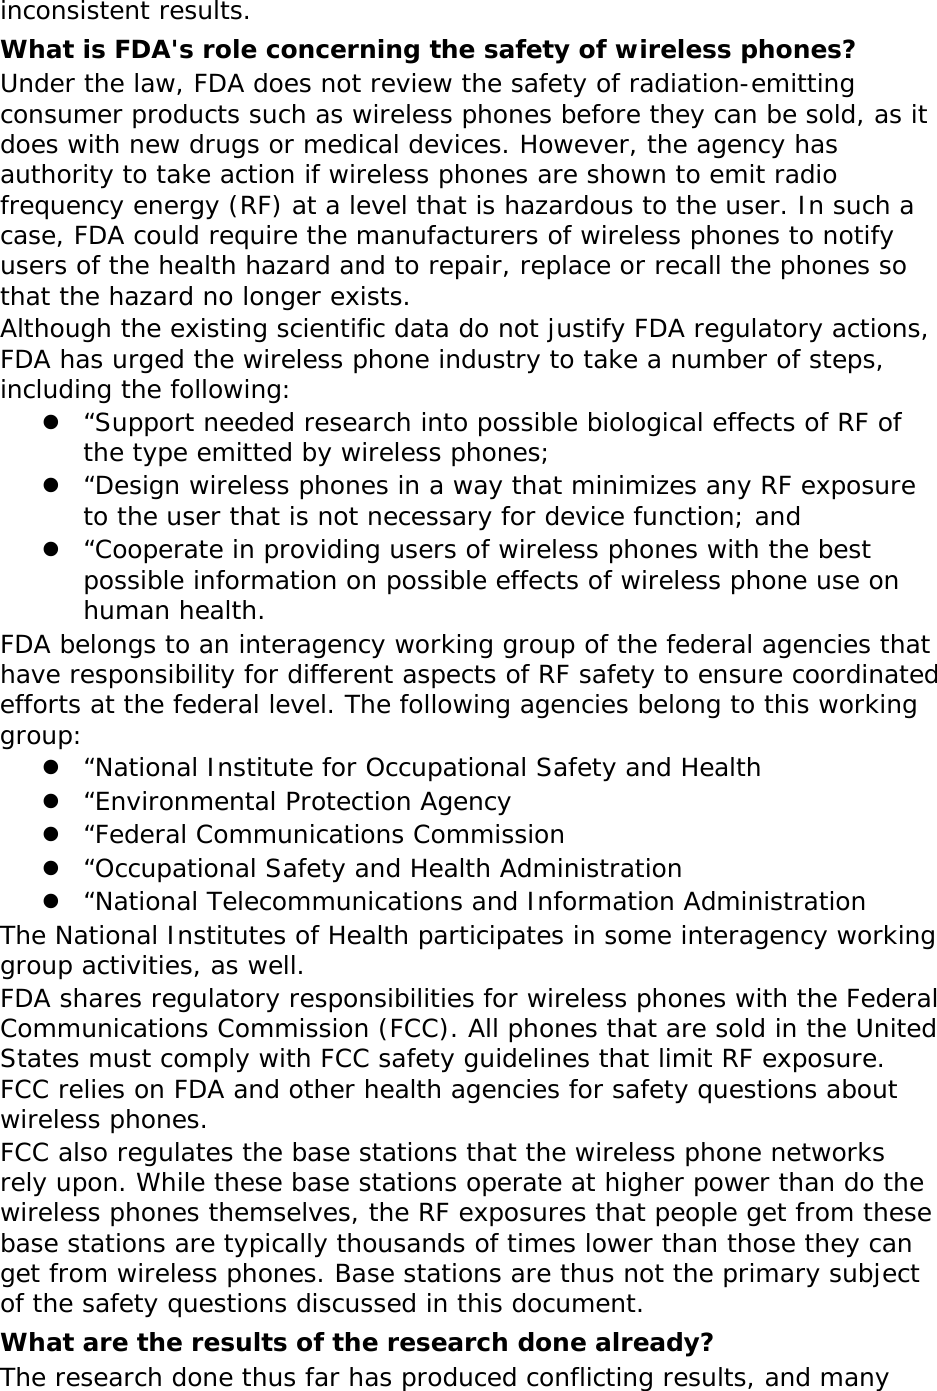 inconsistent results. What is FDA&apos;s role concerning the safety of wireless phones? Under the law, FDA does not review the safety of radiation-emitting consumer products such as wireless phones before they can be sold, as it does with new drugs or medical devices. However, the agency has authority to take action if wireless phones are shown to emit radio frequency energy (RF) at a level that is hazardous to the user. In such a case, FDA could require the manufacturers of wireless phones to notify users of the health hazard and to repair, replace or recall the phones so that the hazard no longer exists. Although the existing scientific data do not justify FDA regulatory actions, FDA has urged the wireless phone industry to take a number of steps, including the following:  “Support needed research into possible biological effects of RF of the type emitted by wireless phones;  “Design wireless phones in a way that minimizes any RF exposure to the user that is not necessary for device function; and  “Cooperate in providing users of wireless phones with the best possible information on possible effects of wireless phone use on human health. FDA belongs to an interagency working group of the federal agencies that have responsibility for different aspects of RF safety to ensure coordinated efforts at the federal level. The following agencies belong to this working group:  “National Institute for Occupational Safety and Health  “Environmental Protection Agency  “Federal Communications Commission  “Occupational Safety and Health Administration  “National Telecommunications and Information Administration The National Institutes of Health participates in some interagency working group activities, as well. FDA shares regulatory responsibilities for wireless phones with the Federal Communications Commission (FCC). All phones that are sold in the United States must comply with FCC safety guidelines that limit RF exposure. FCC relies on FDA and other health agencies for safety questions about wireless phones. FCC also regulates the base stations that the wireless phone networks rely upon. While these base stations operate at higher power than do the wireless phones themselves, the RF exposures that people get from these base stations are typically thousands of times lower than those they can get from wireless phones. Base stations are thus not the primary subject of the safety questions discussed in this document. What are the results of the research done already? The research done thus far has produced conflicting results, and many 